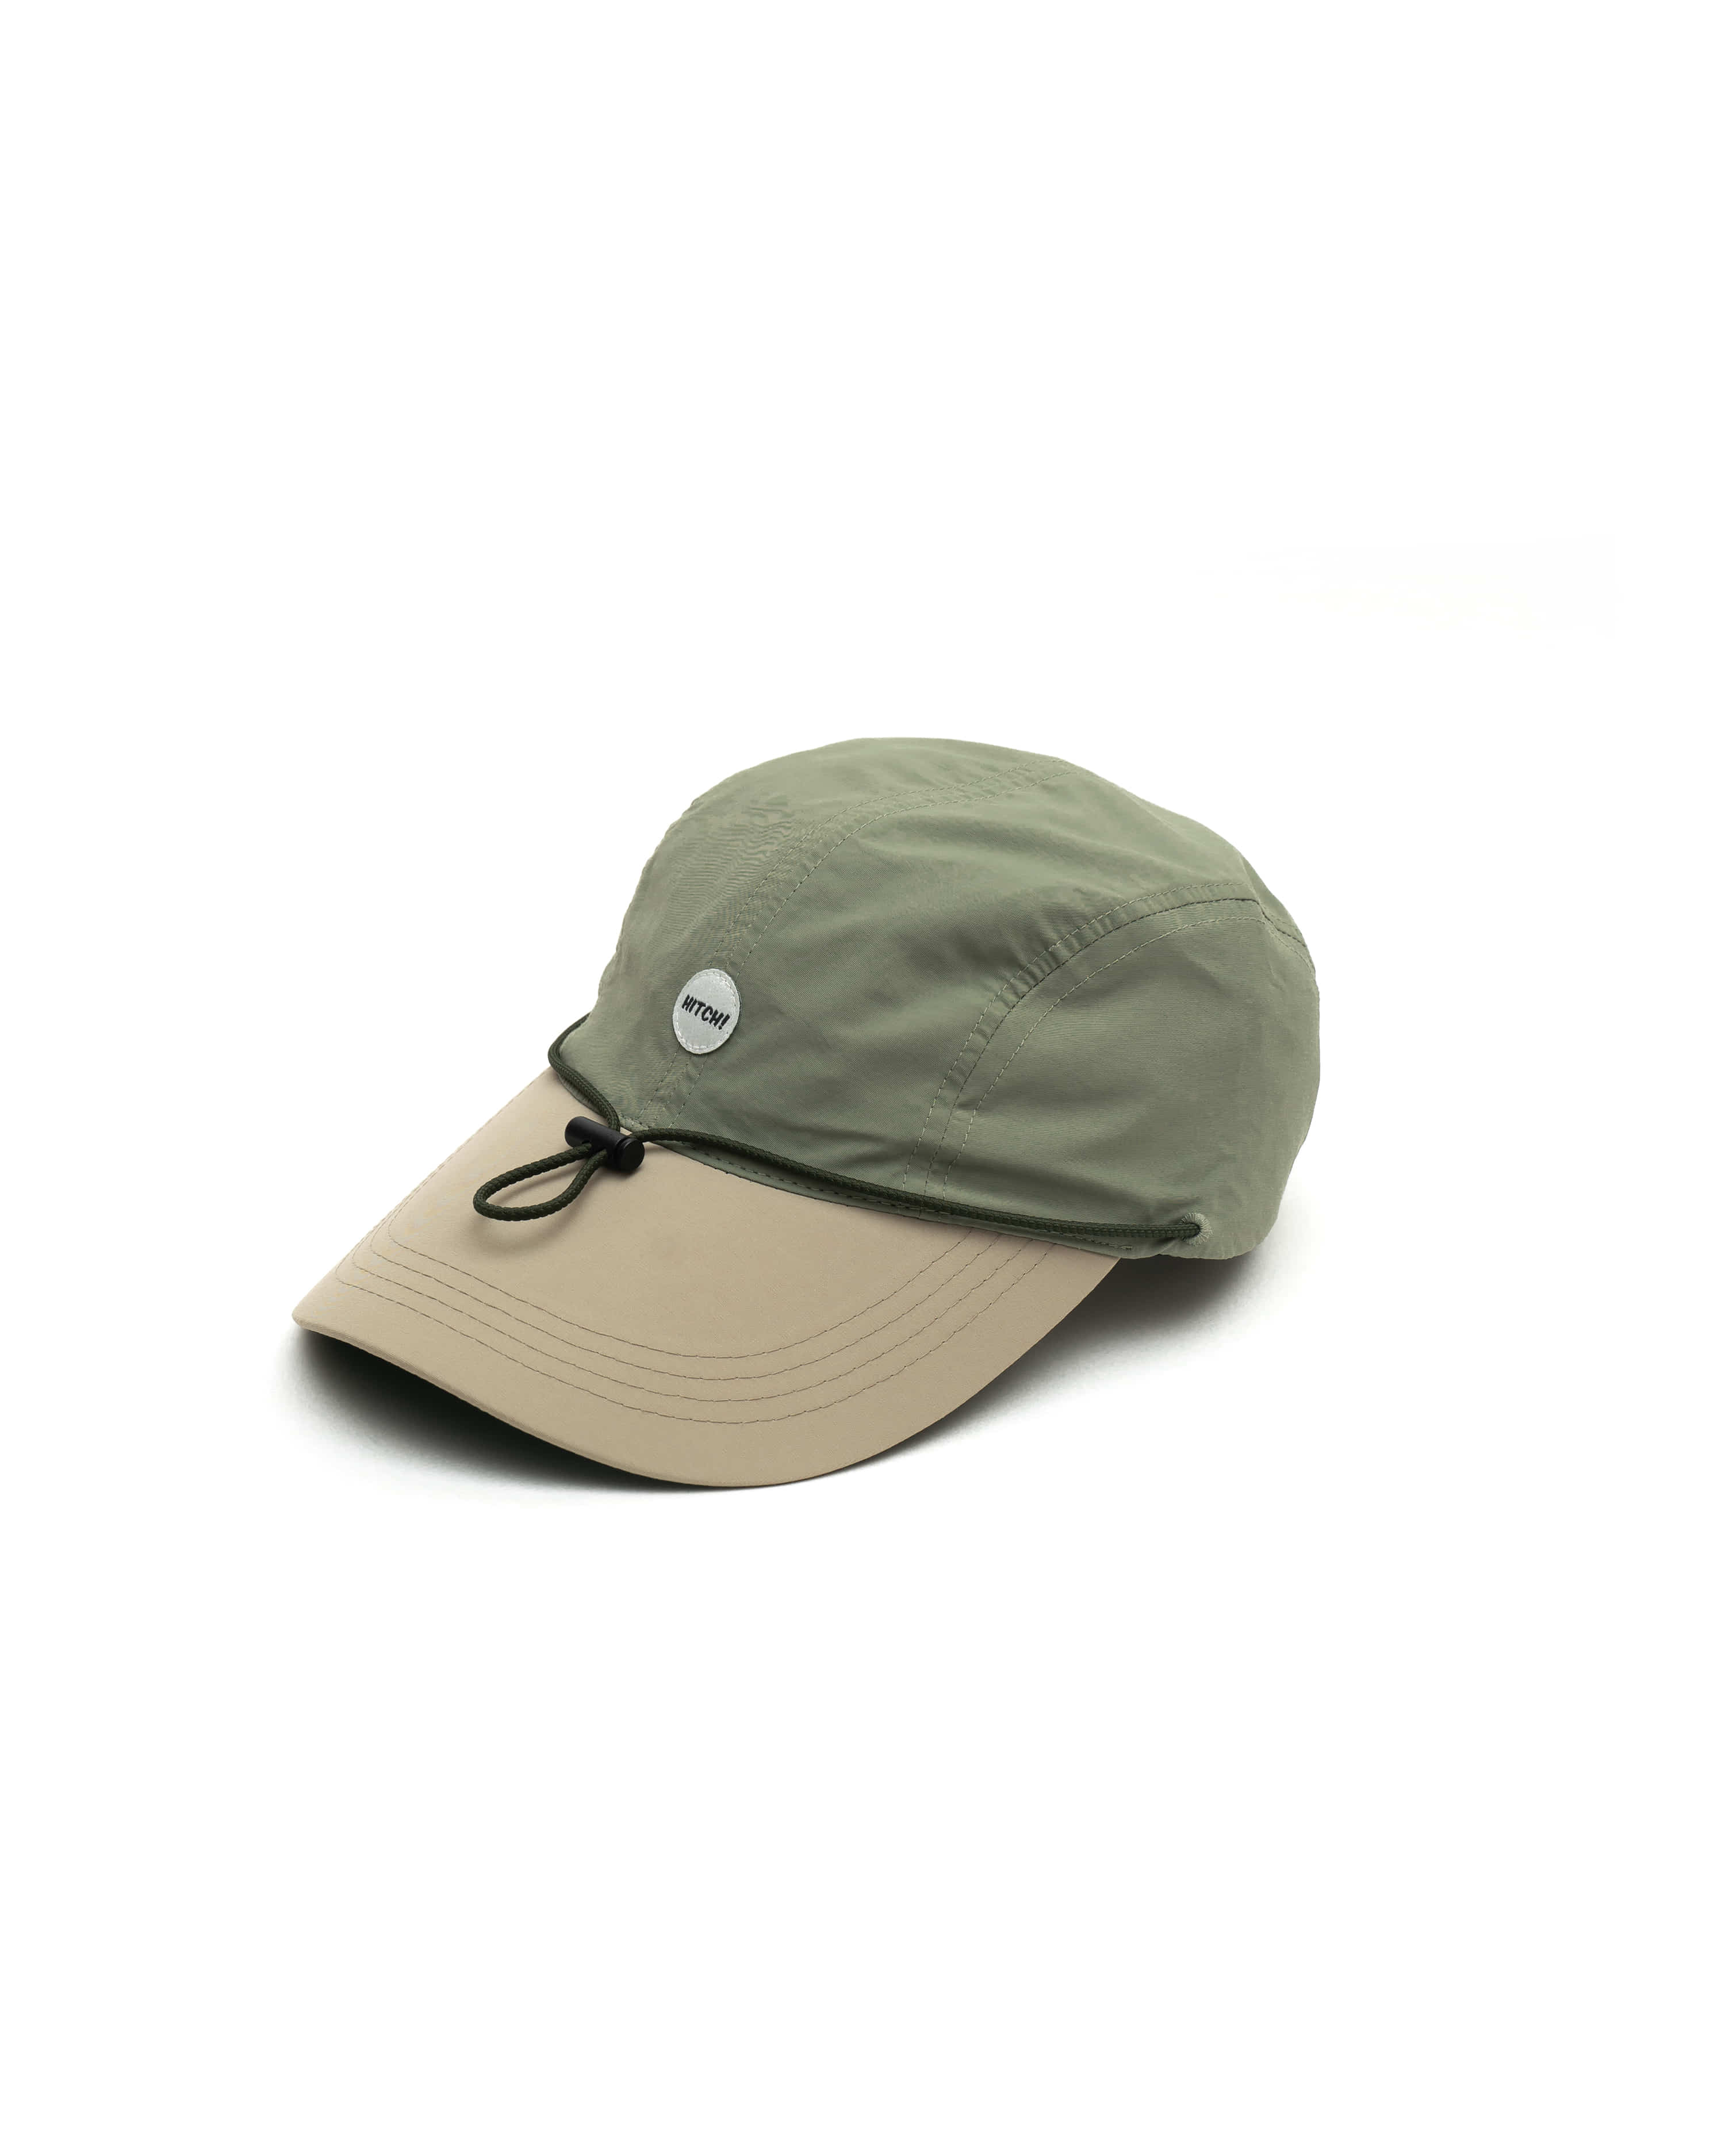 [New Color] River - Olive Green (Longbill)